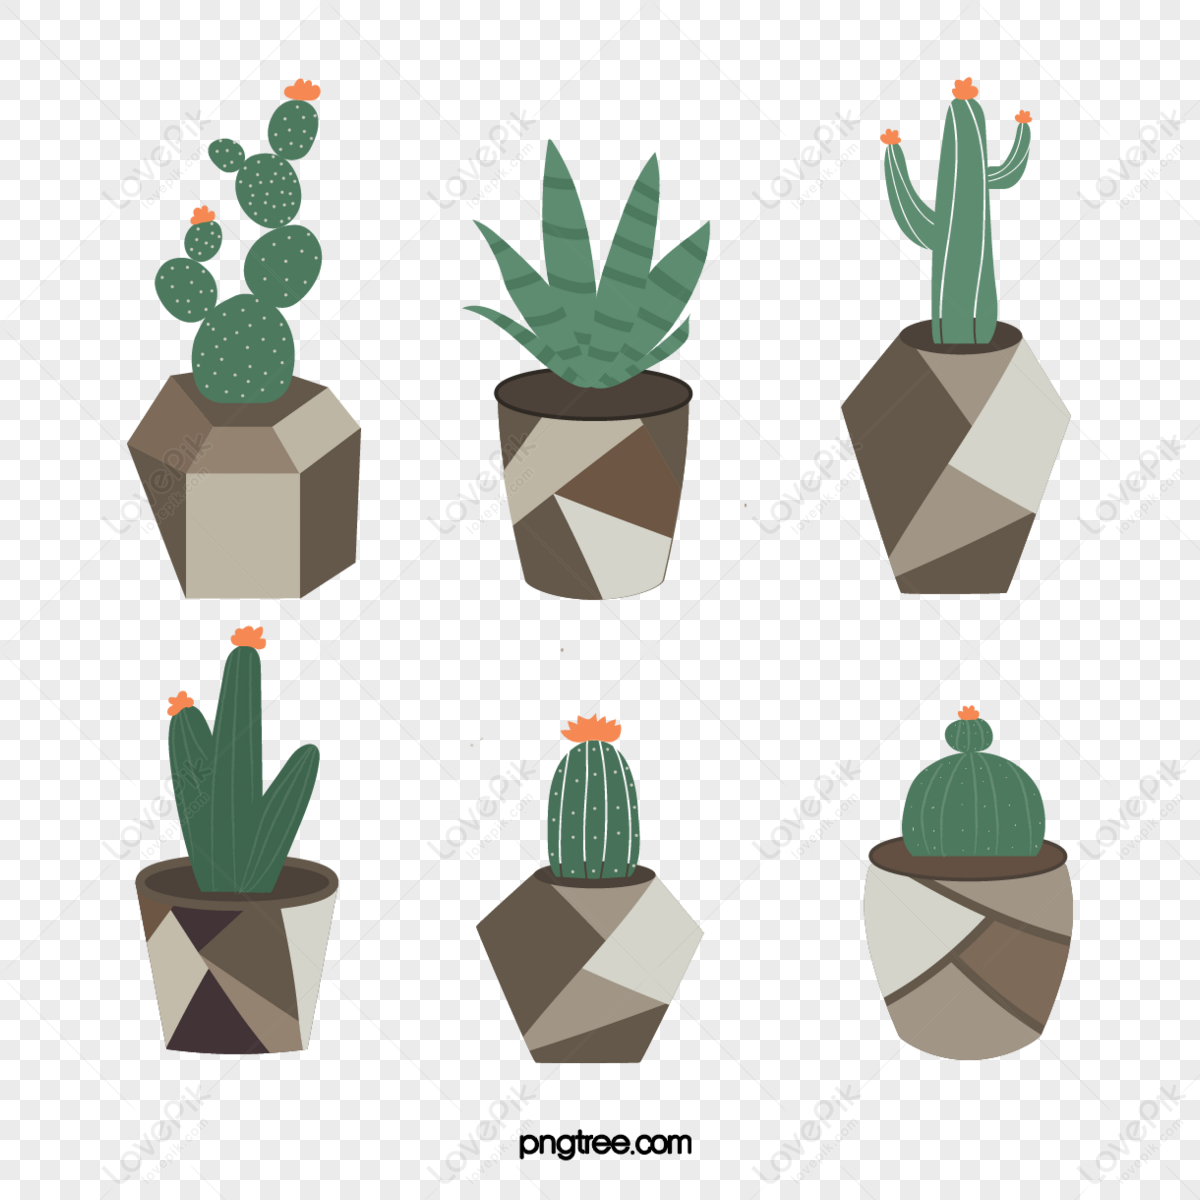 Cactus Collection Vector Design Images, Aesthetic Cactus Sticker  Collection, Aesthetic, Cactus, Sticker PNG Image For Free Download